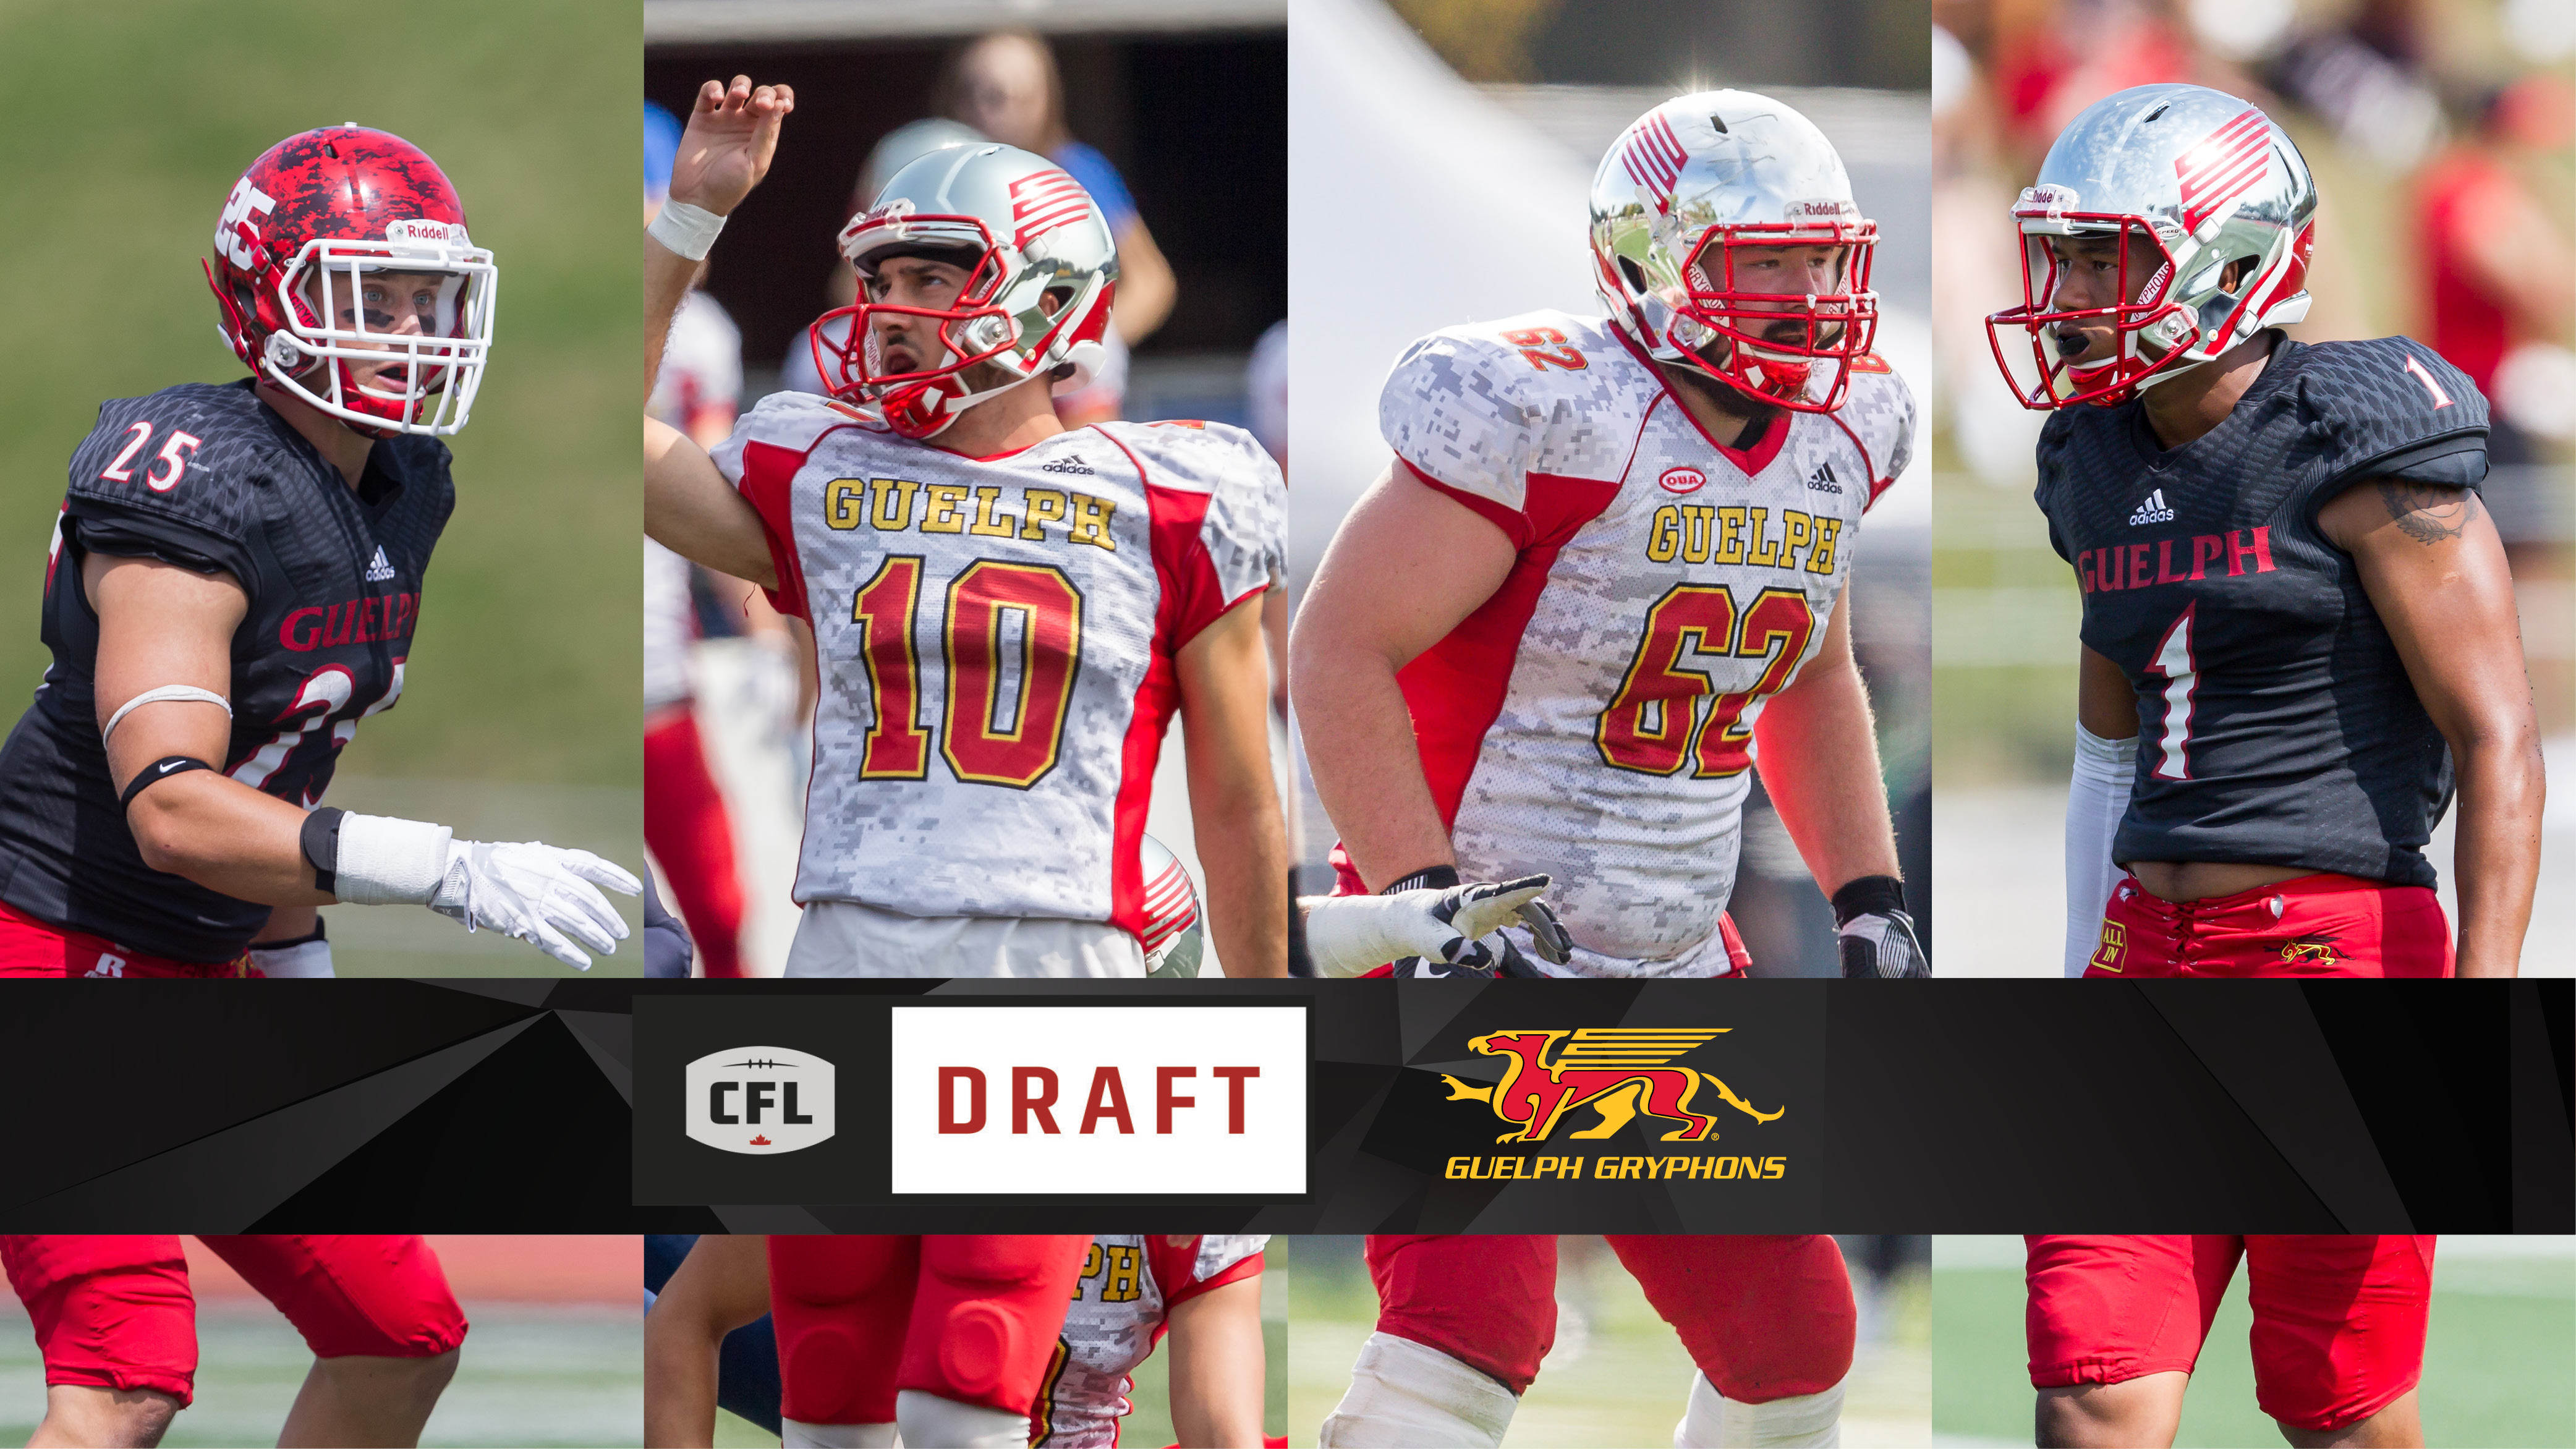 Images of former Gryphon football players selected in 2018 CFL draft